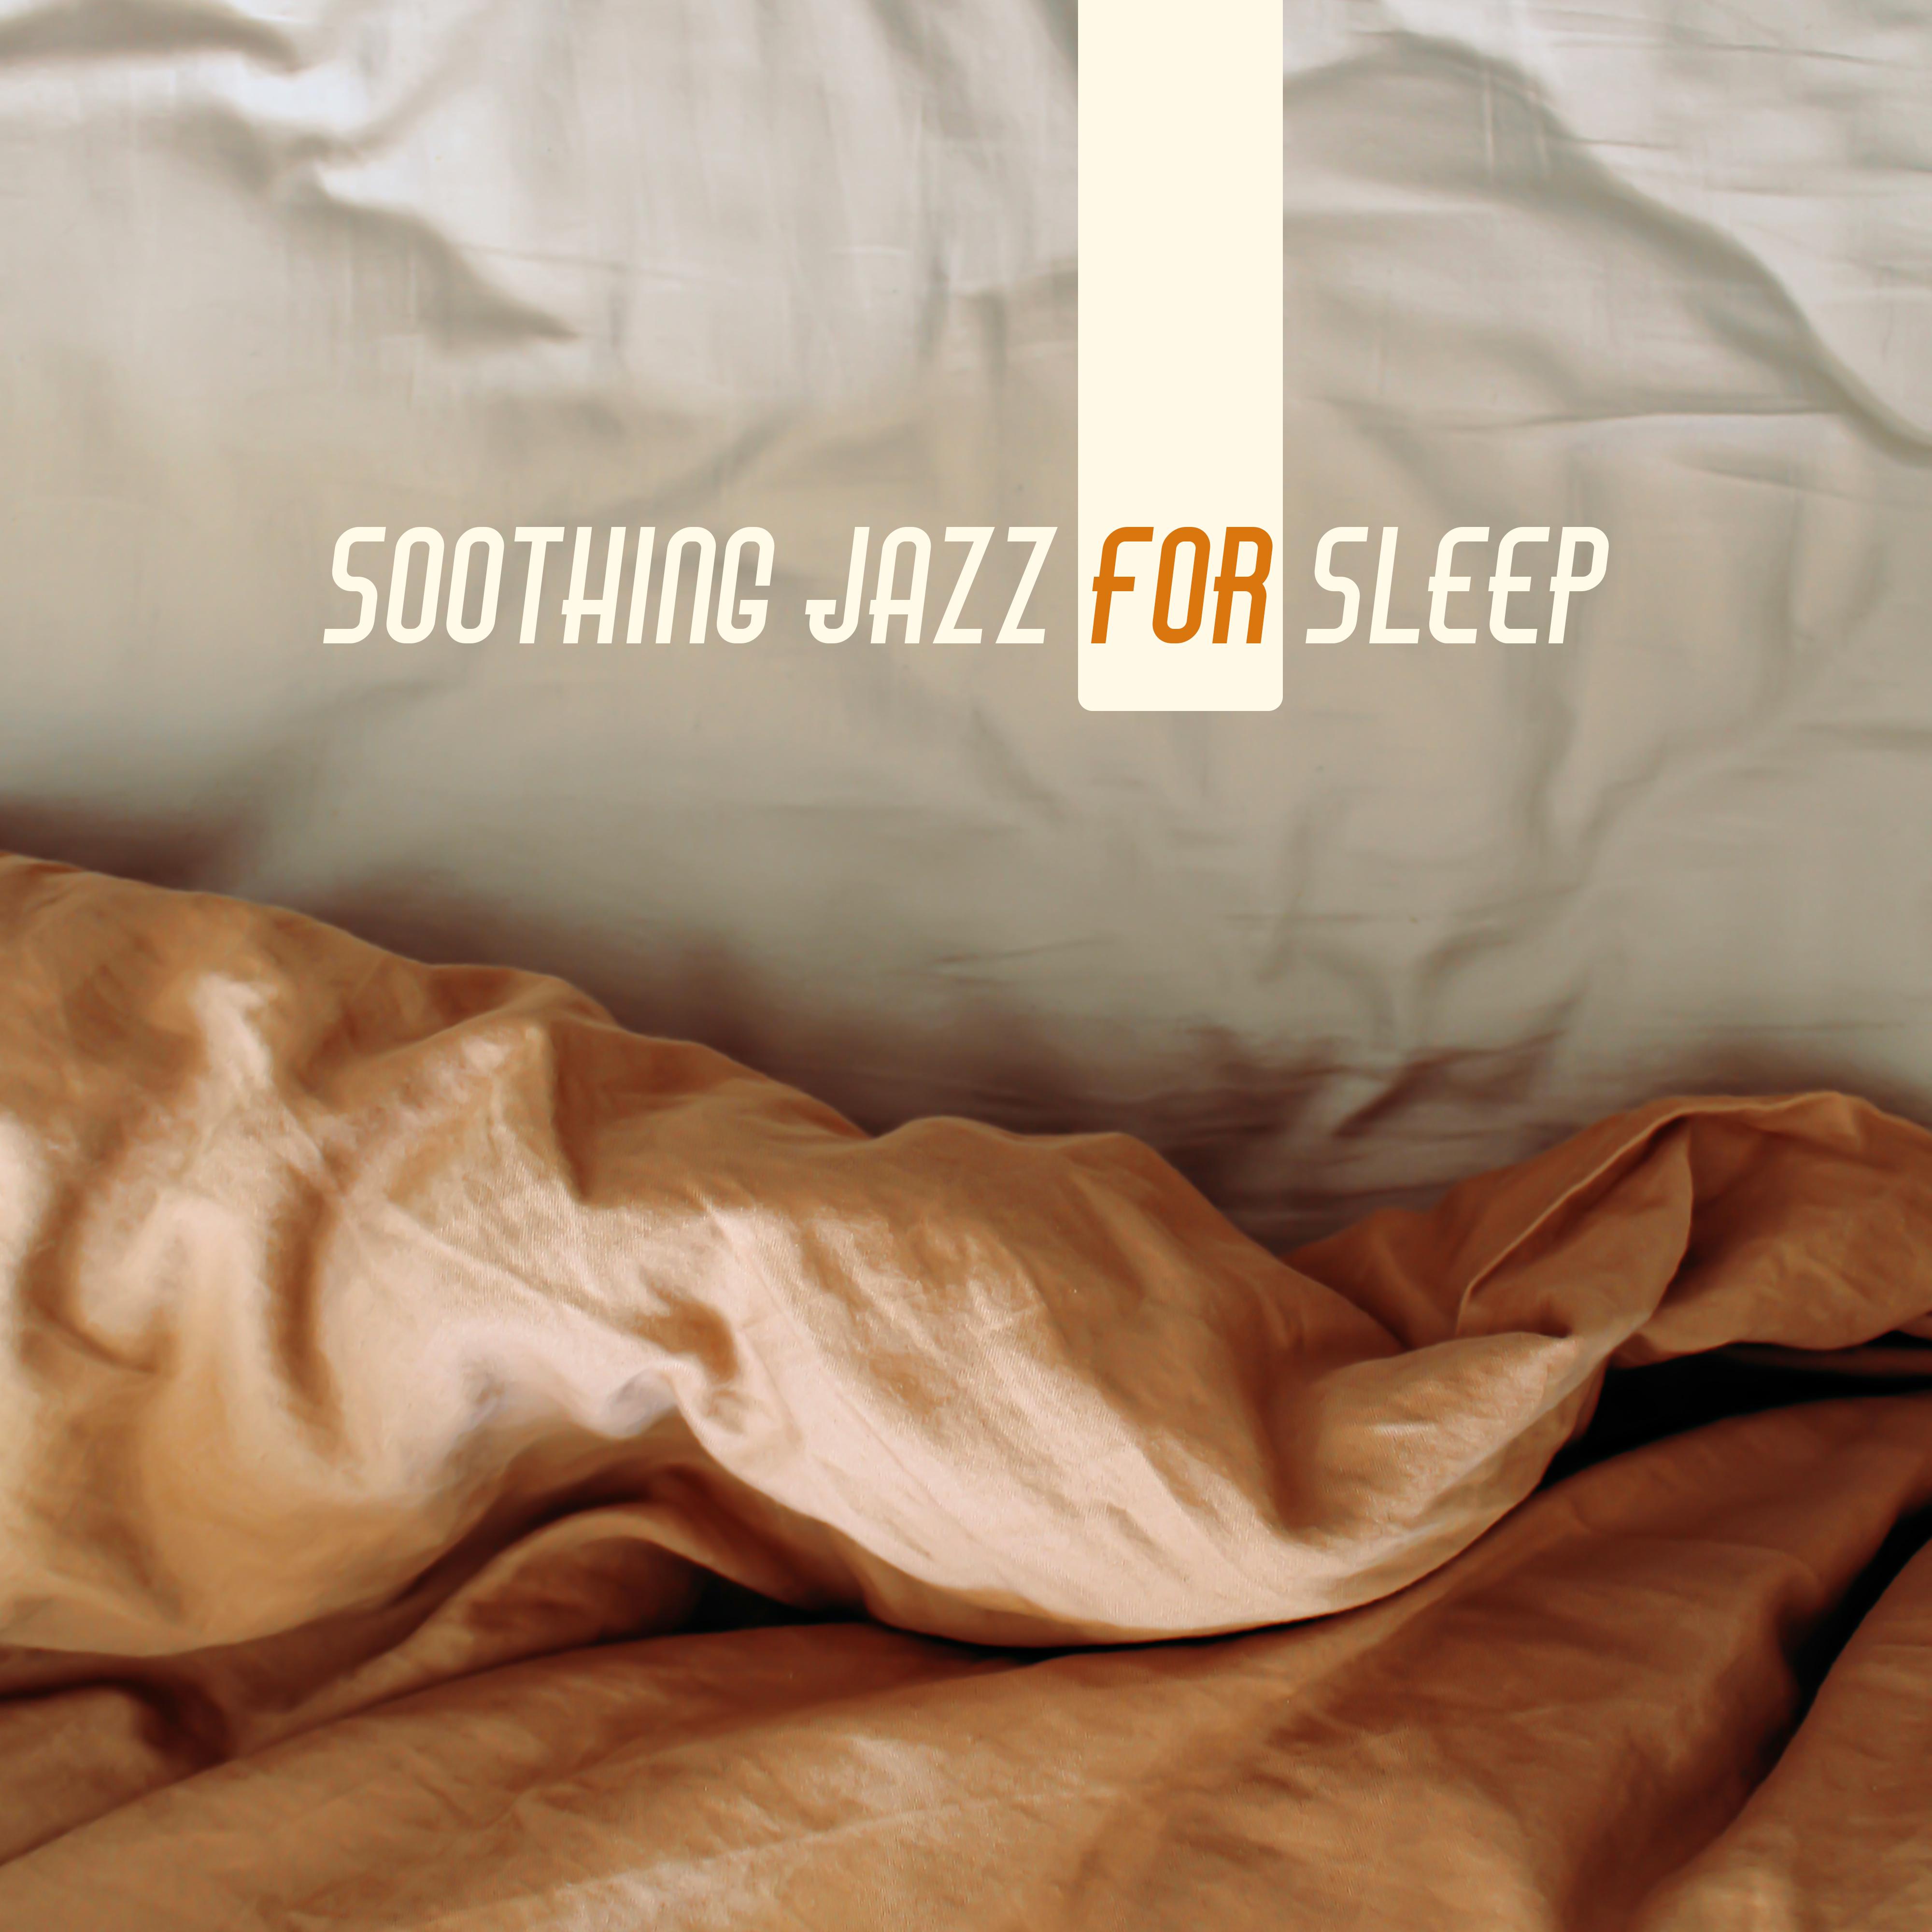 Soothing Jazz for Sleep: Calming Sounds at Night, Gentle Lullabies, Jazz Relaxation, Instrumental Music to Rest